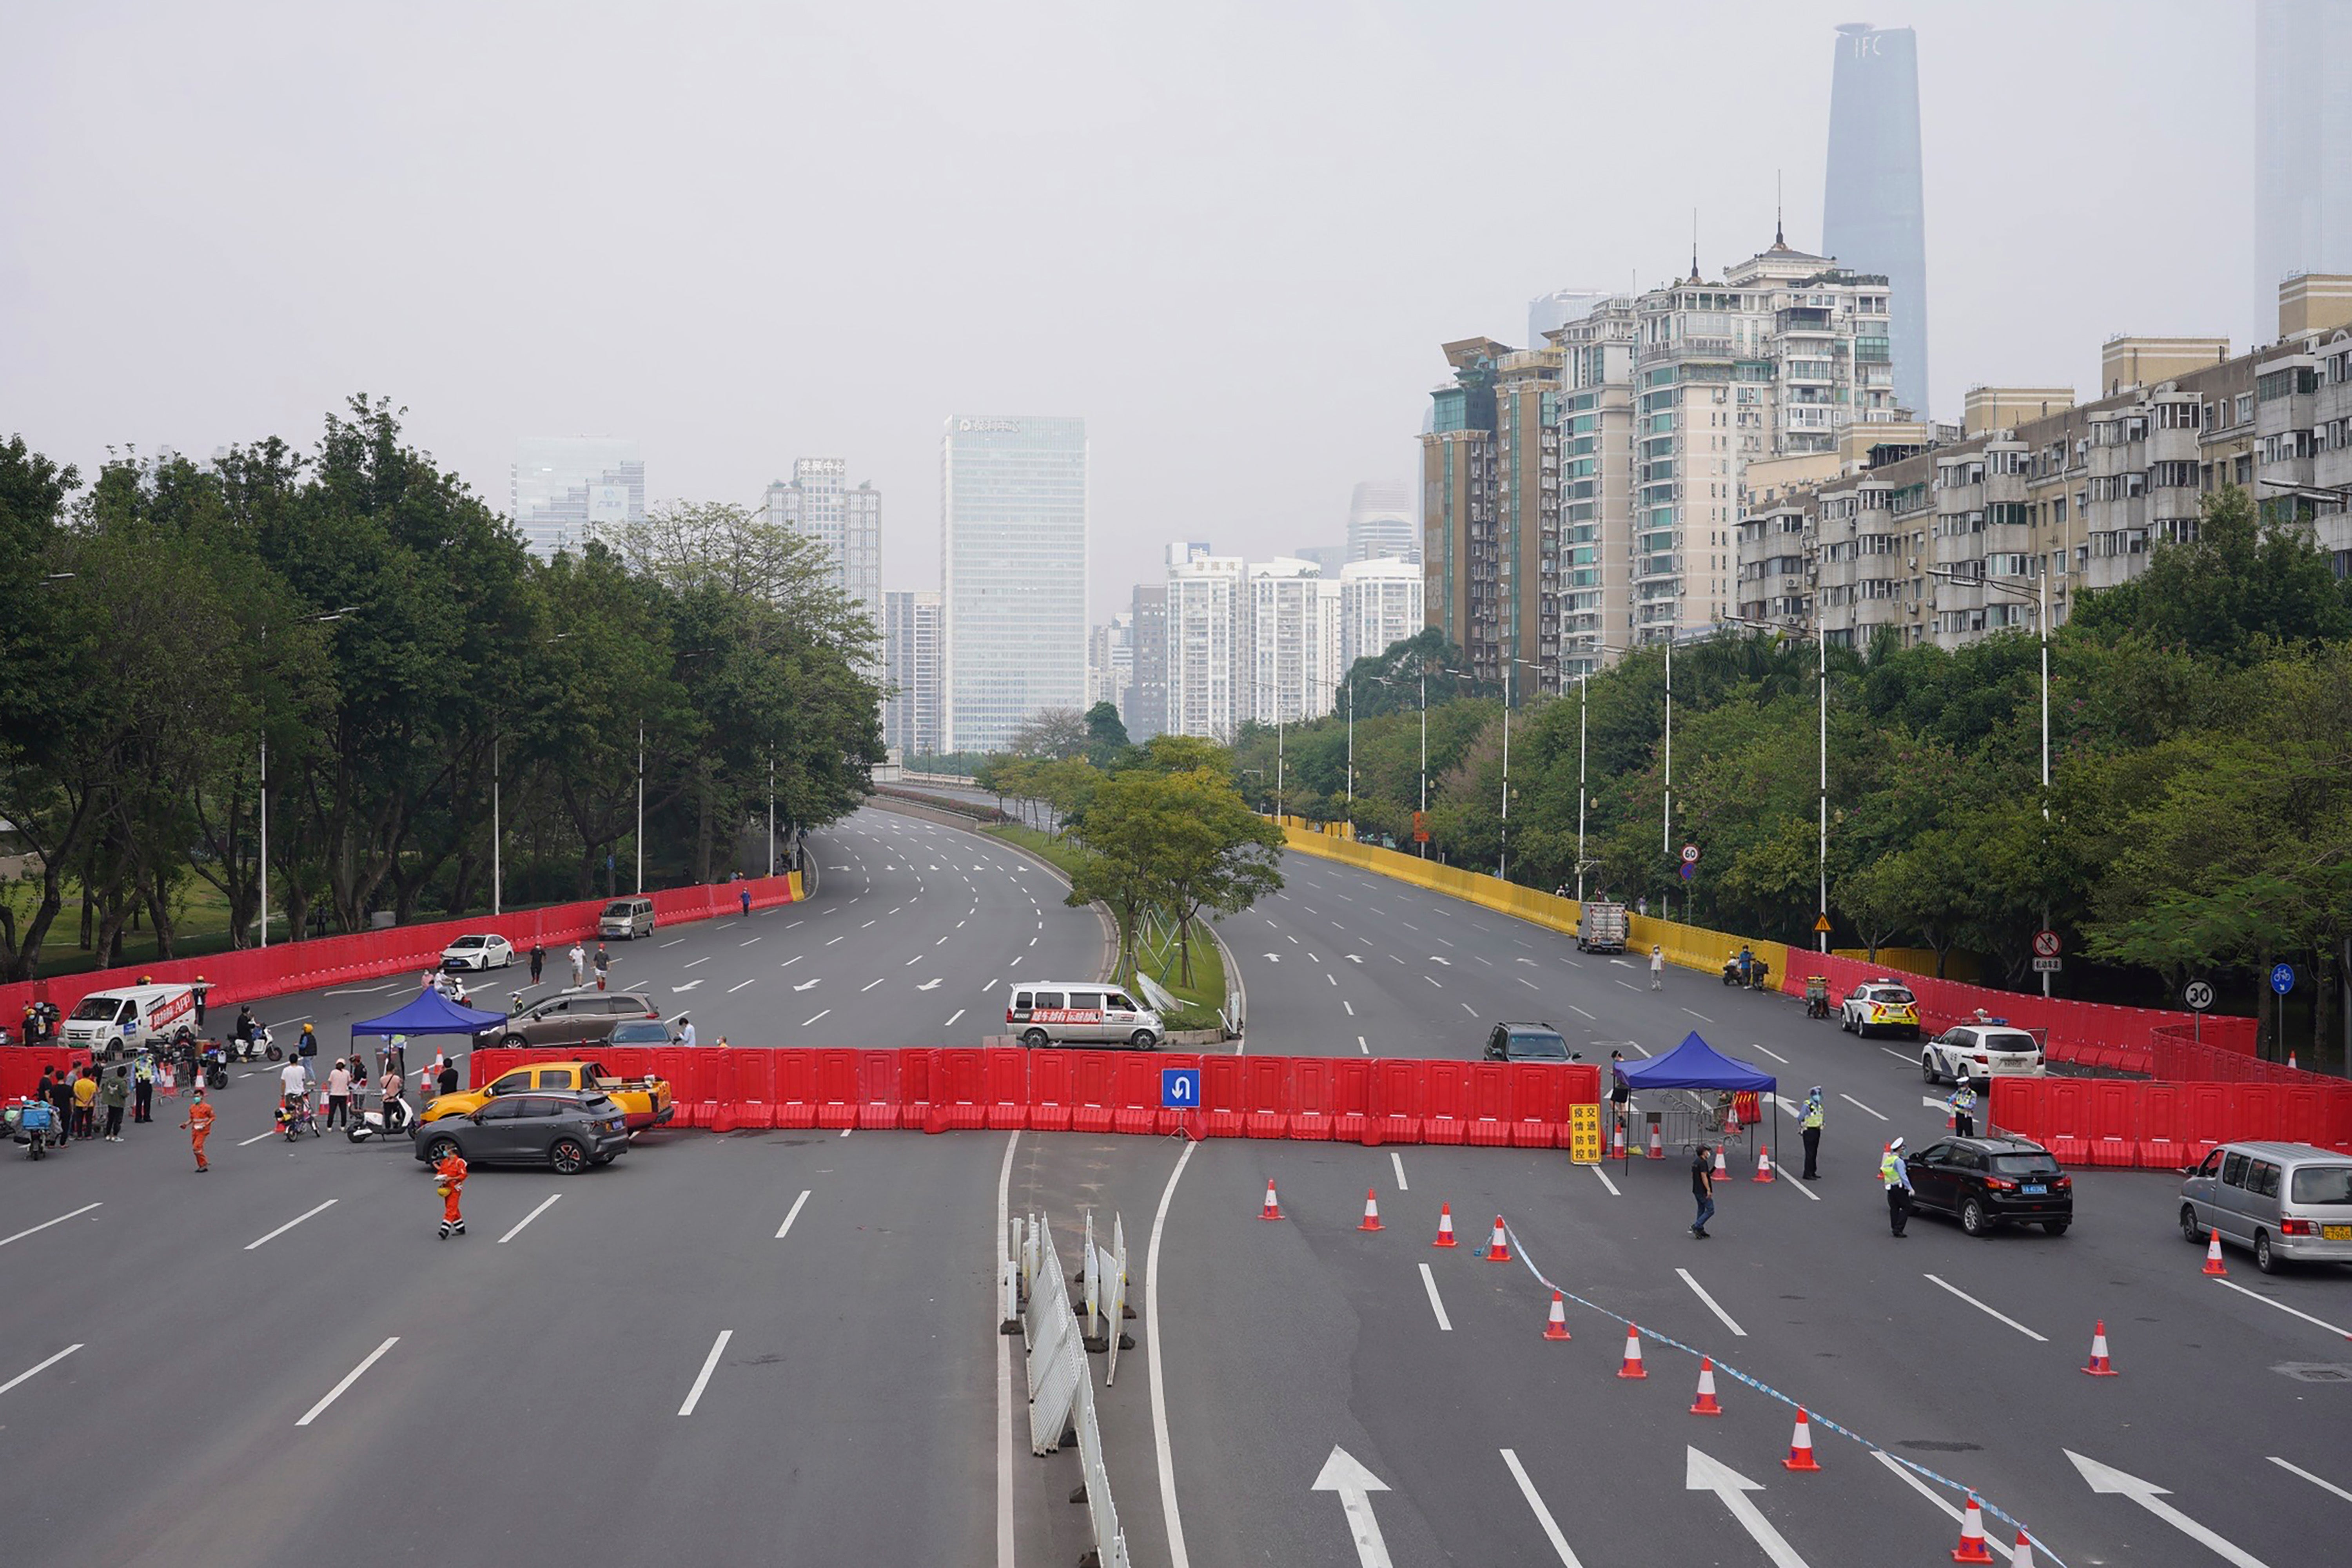 Barriers form a security checkpoint in the Haizhu district in Guangzhou in southern China’s Guangdong province